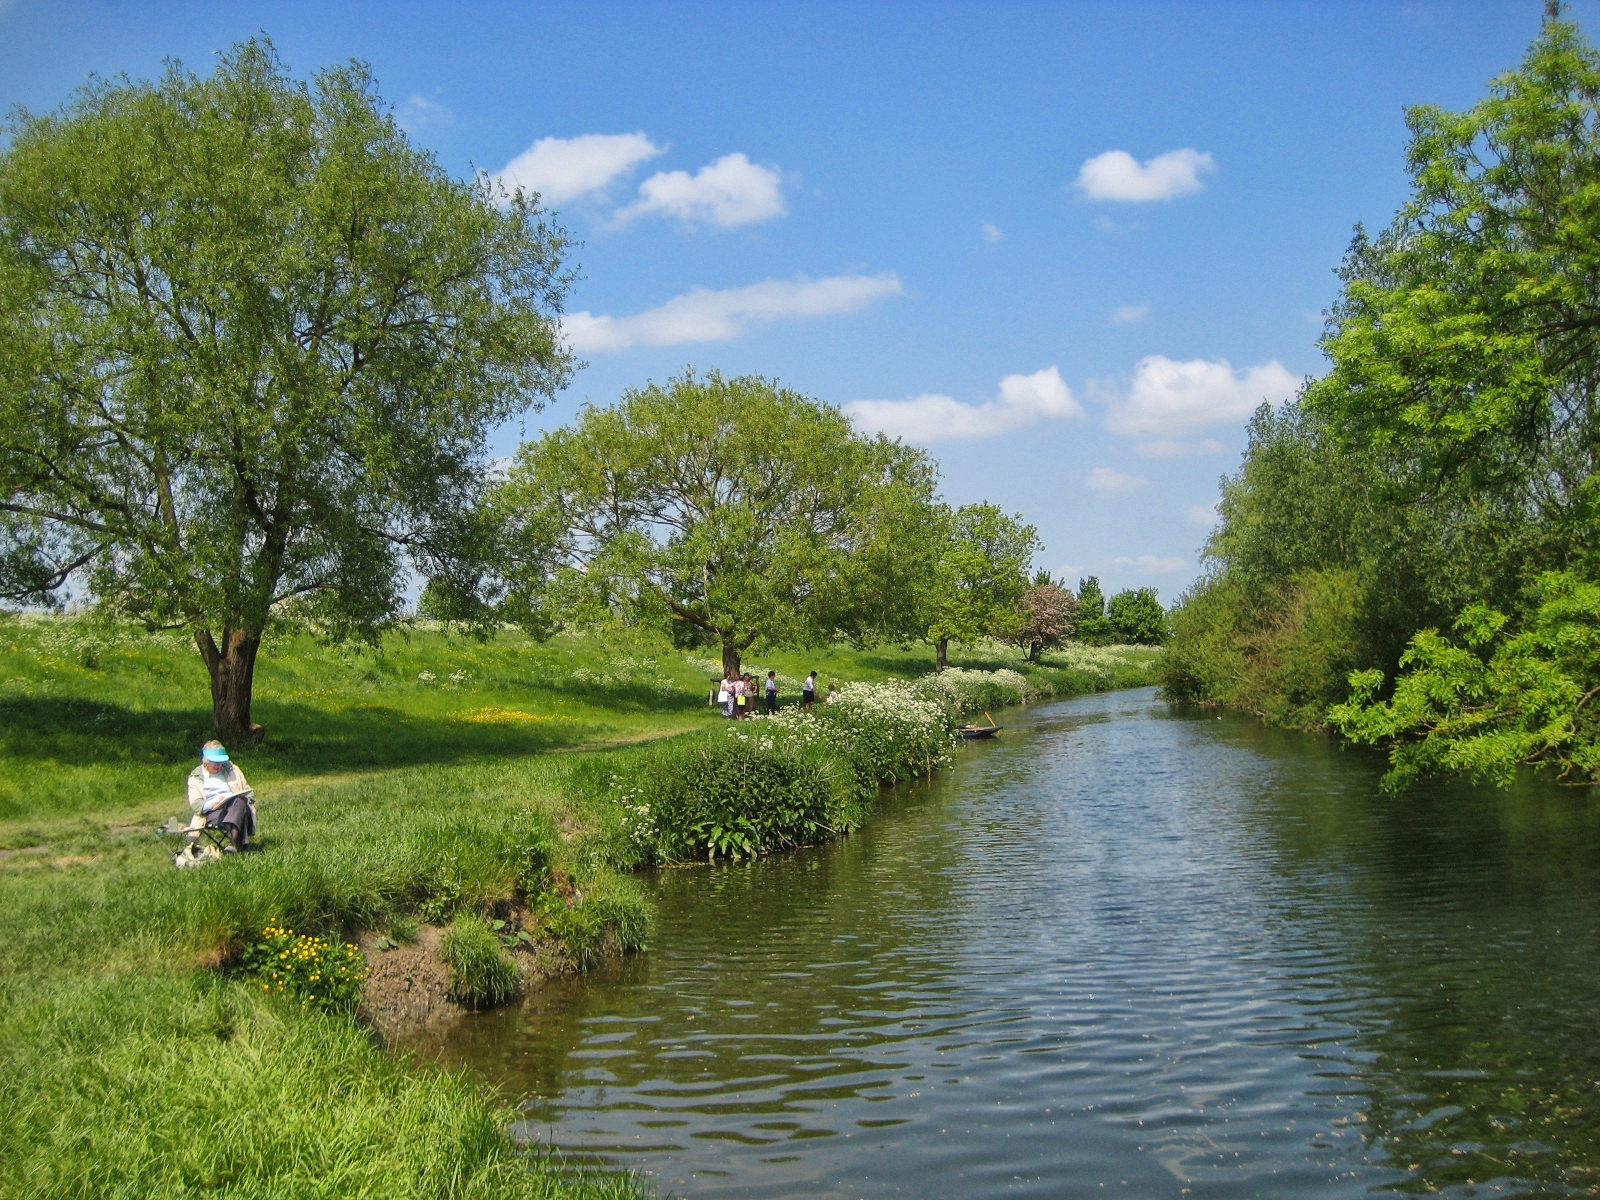 The banks of the River Cam at Grantchester, Cambridgeshire